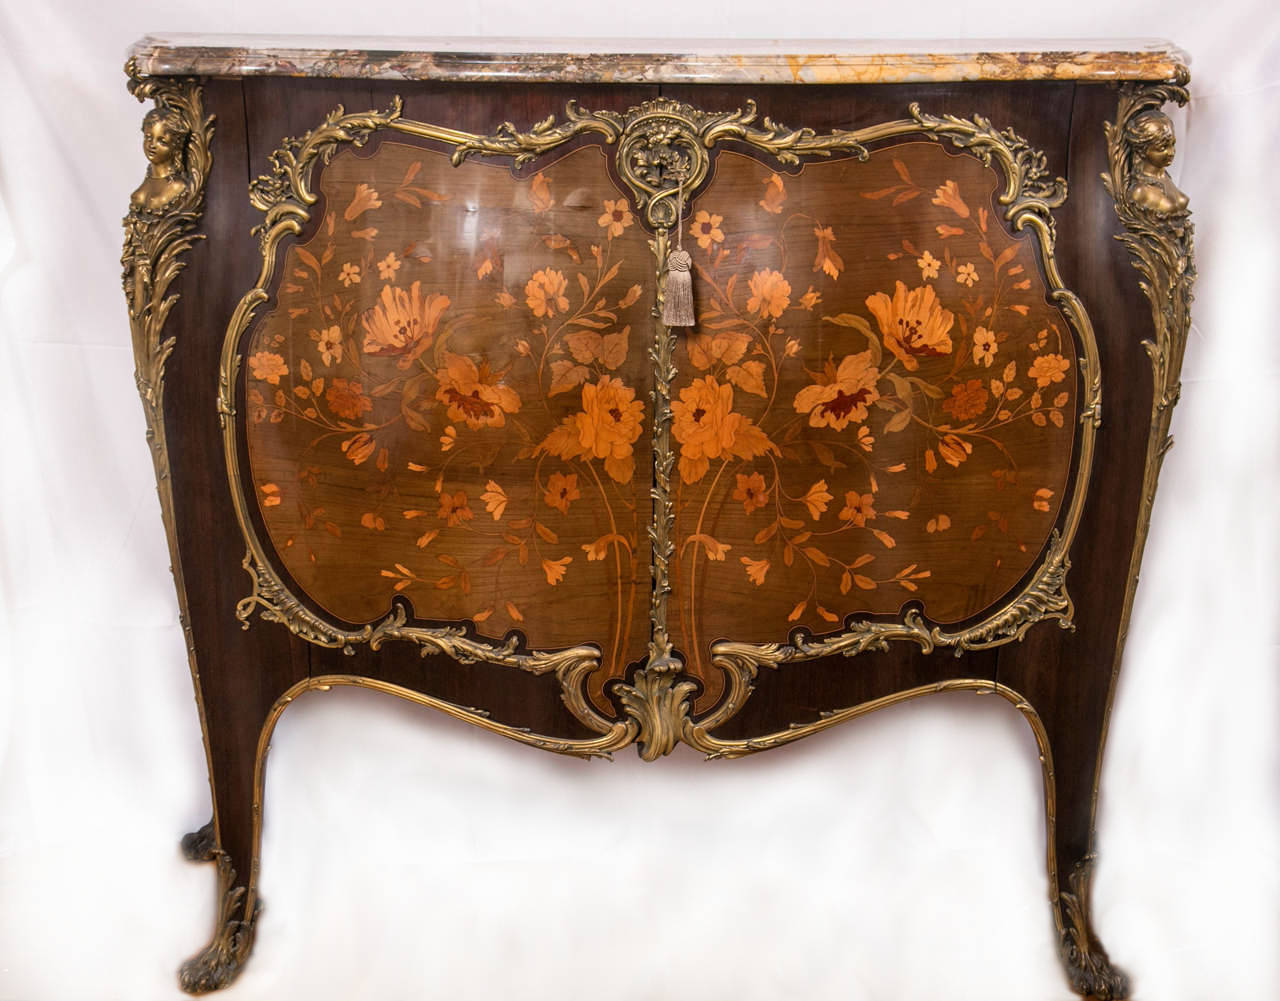 An extremely fine and important bronze-mounted marquetry inlaid two door commode or cabinet, signed, Jansen, with the bronzes stamped ZN. Standing on tall legs, this incredible marble top piece has a beautiful serpentine shape, as well as bombe.